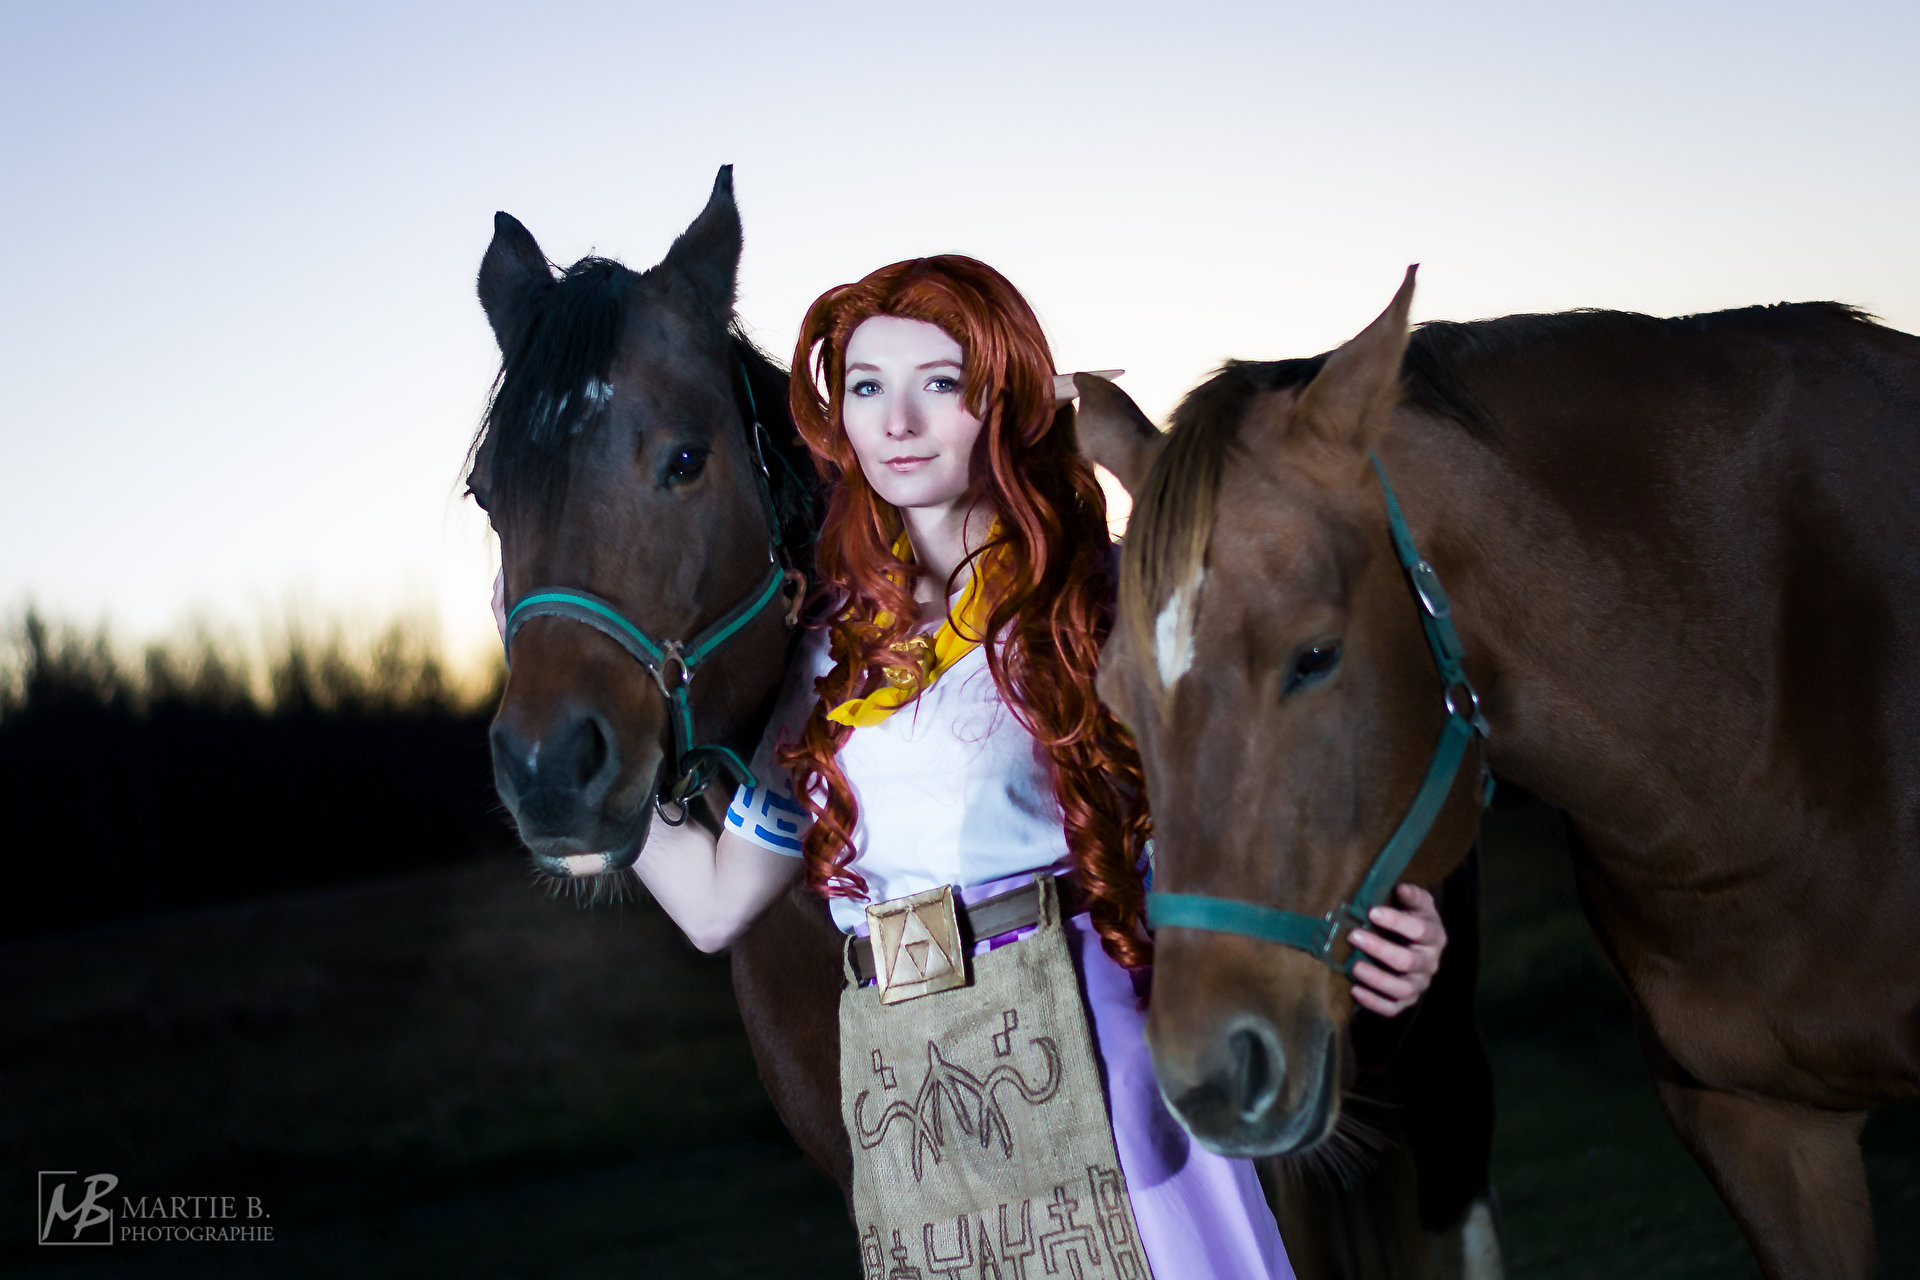 Cospix.net photo featuring Martie B. Photographie and Bandit Spurs